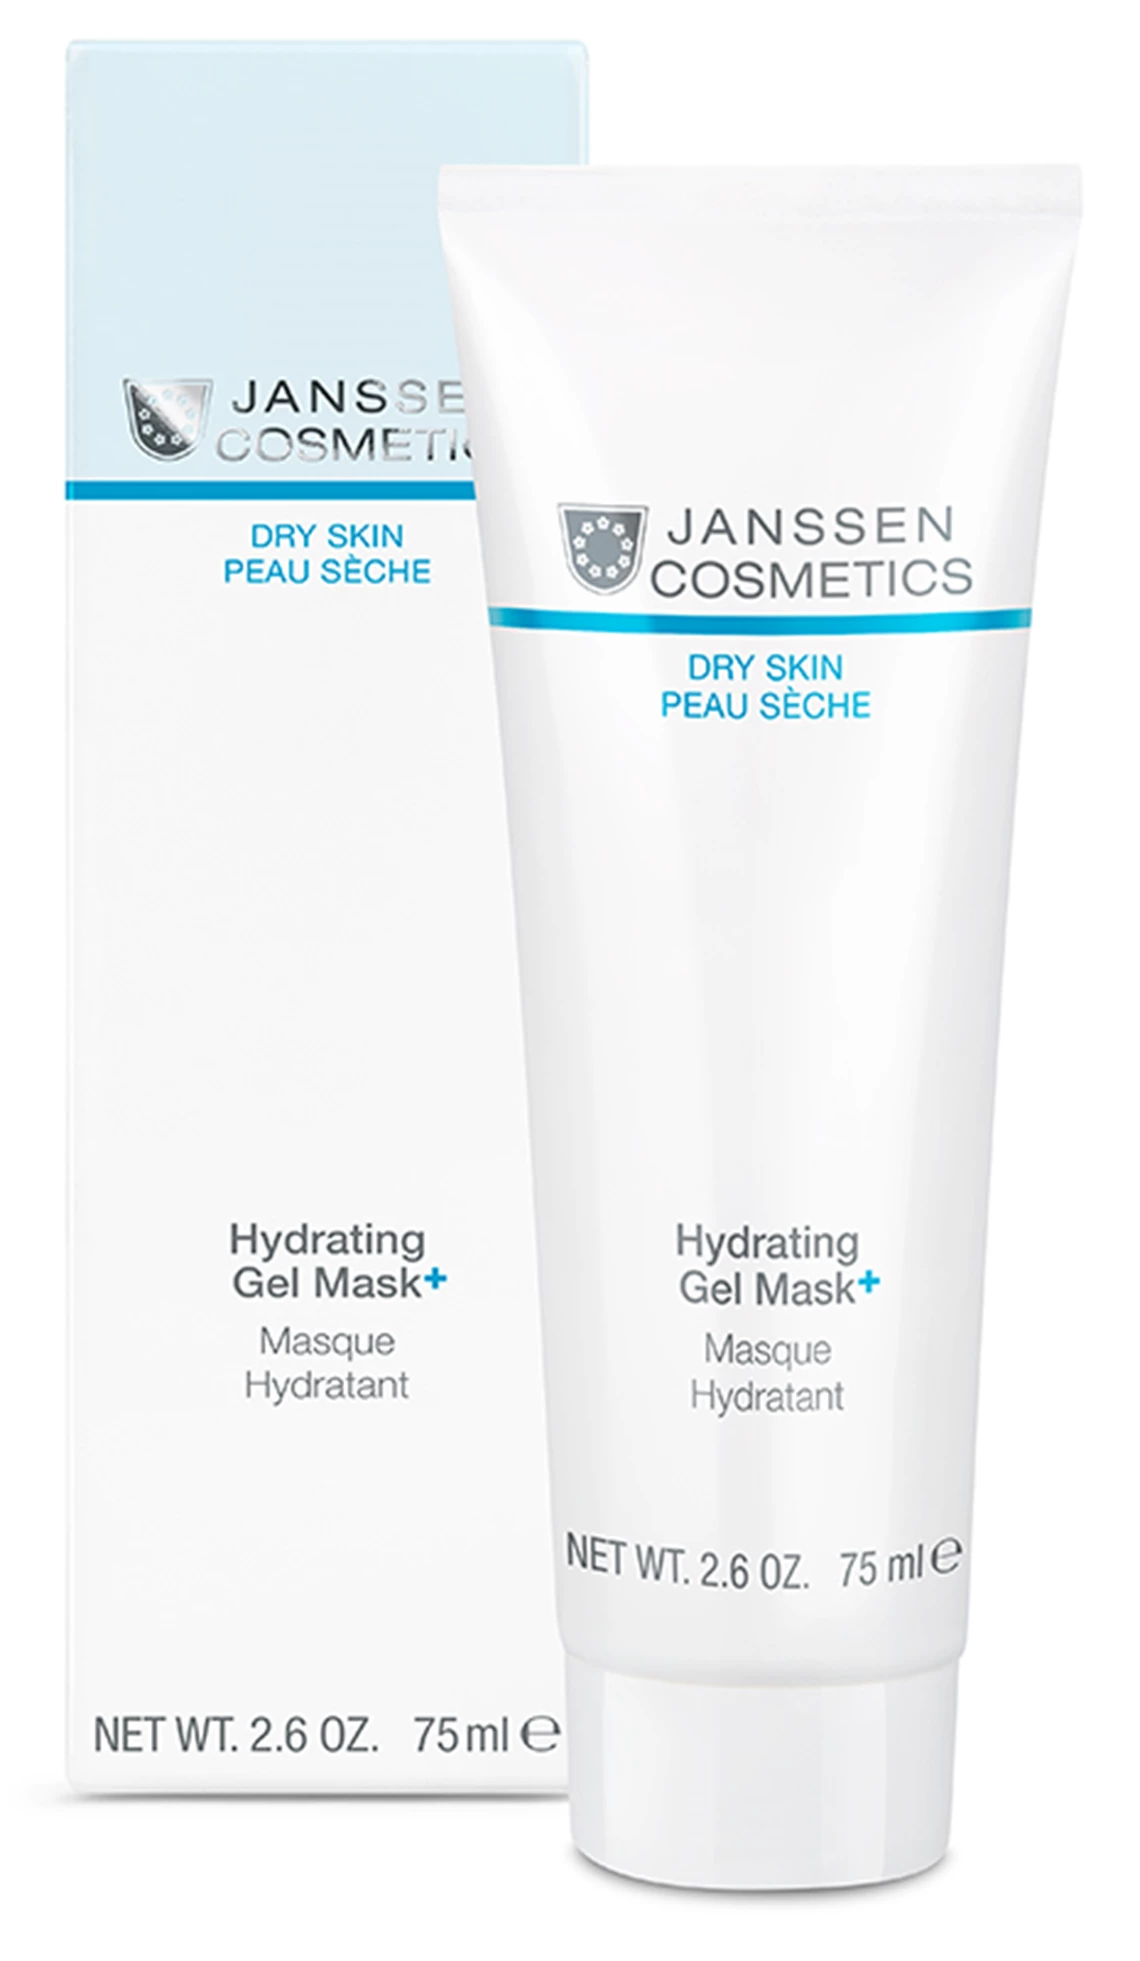 590_05_PIC_LOW_HYDRATING_GEL_MASK_Plus